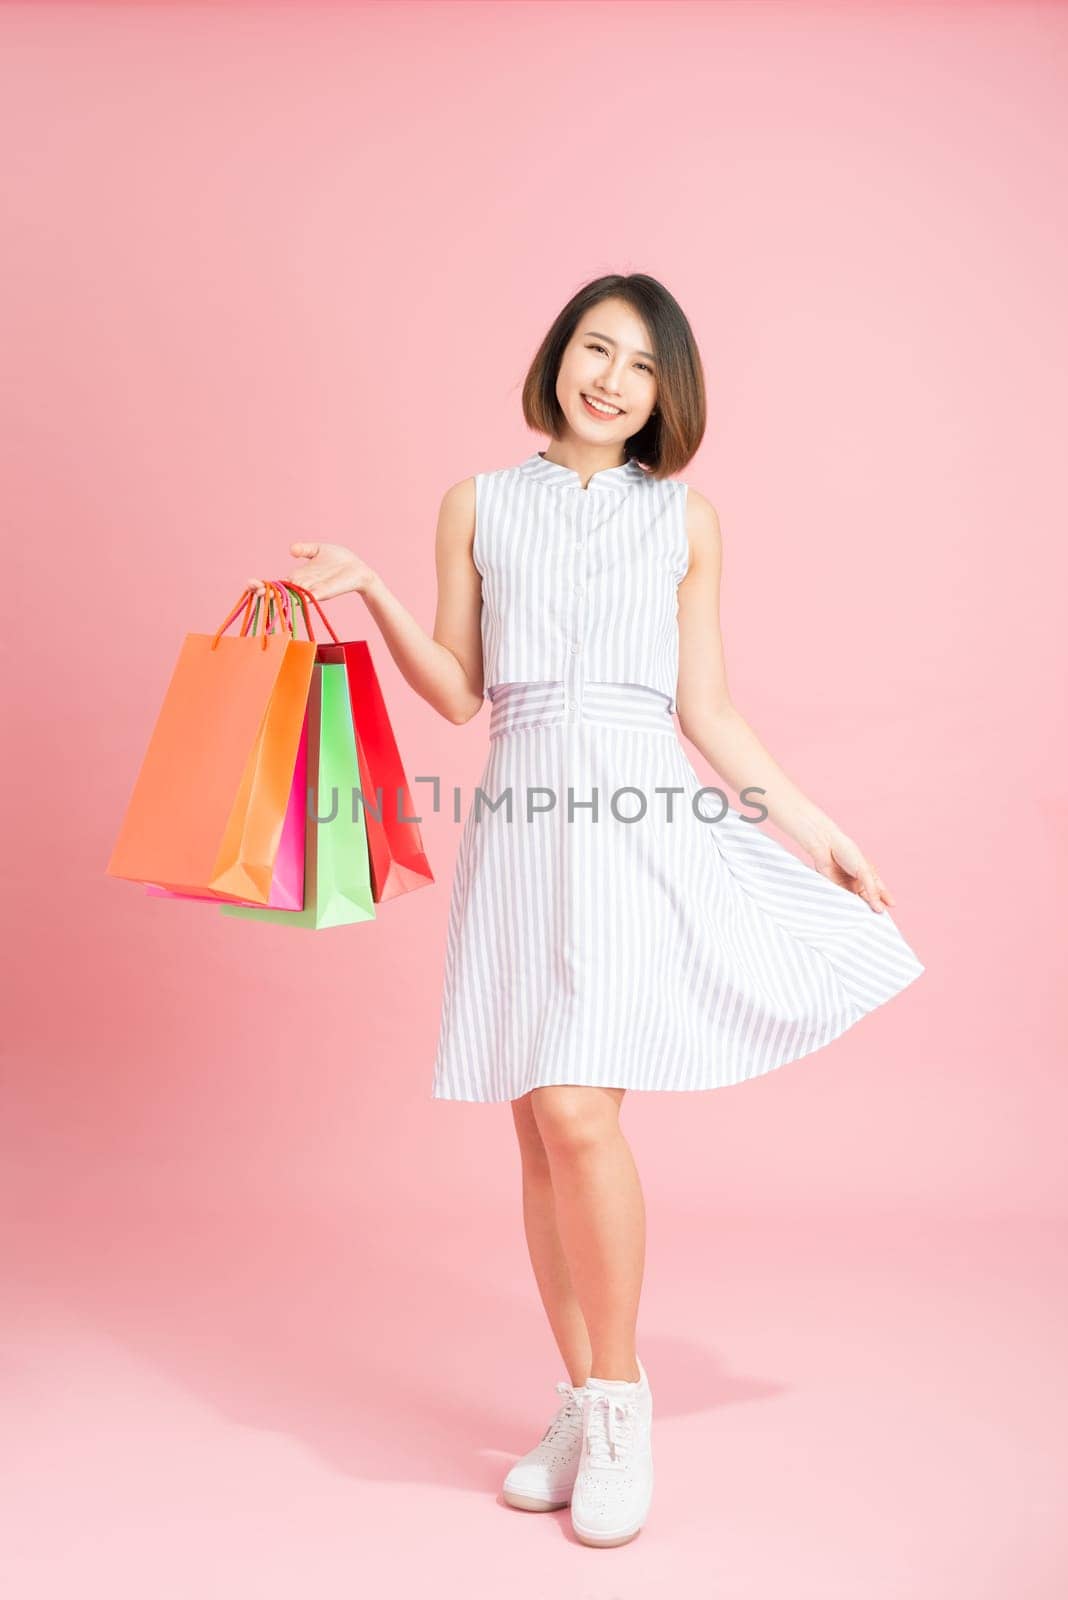 woman in sundress shopping shopaholic by makidotvn